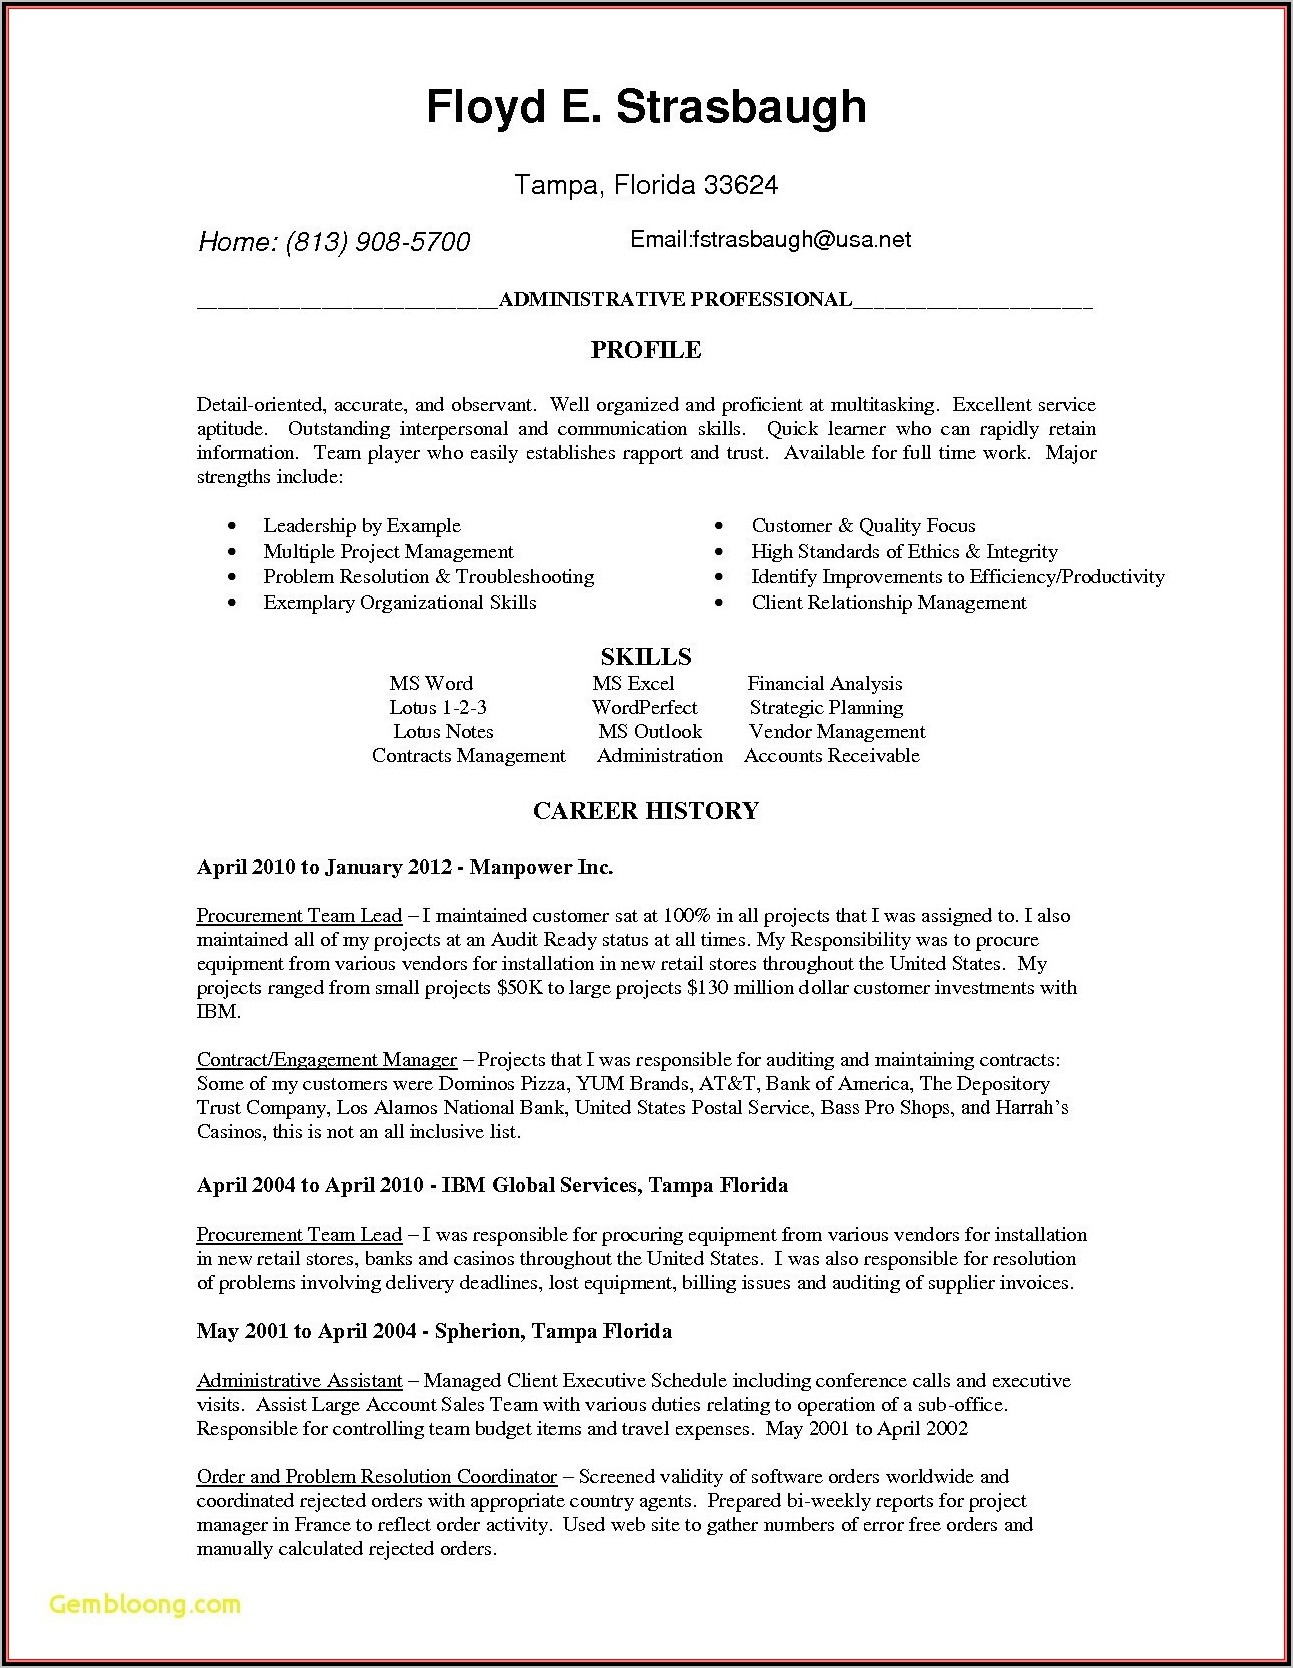 Resume Template For Sales Position